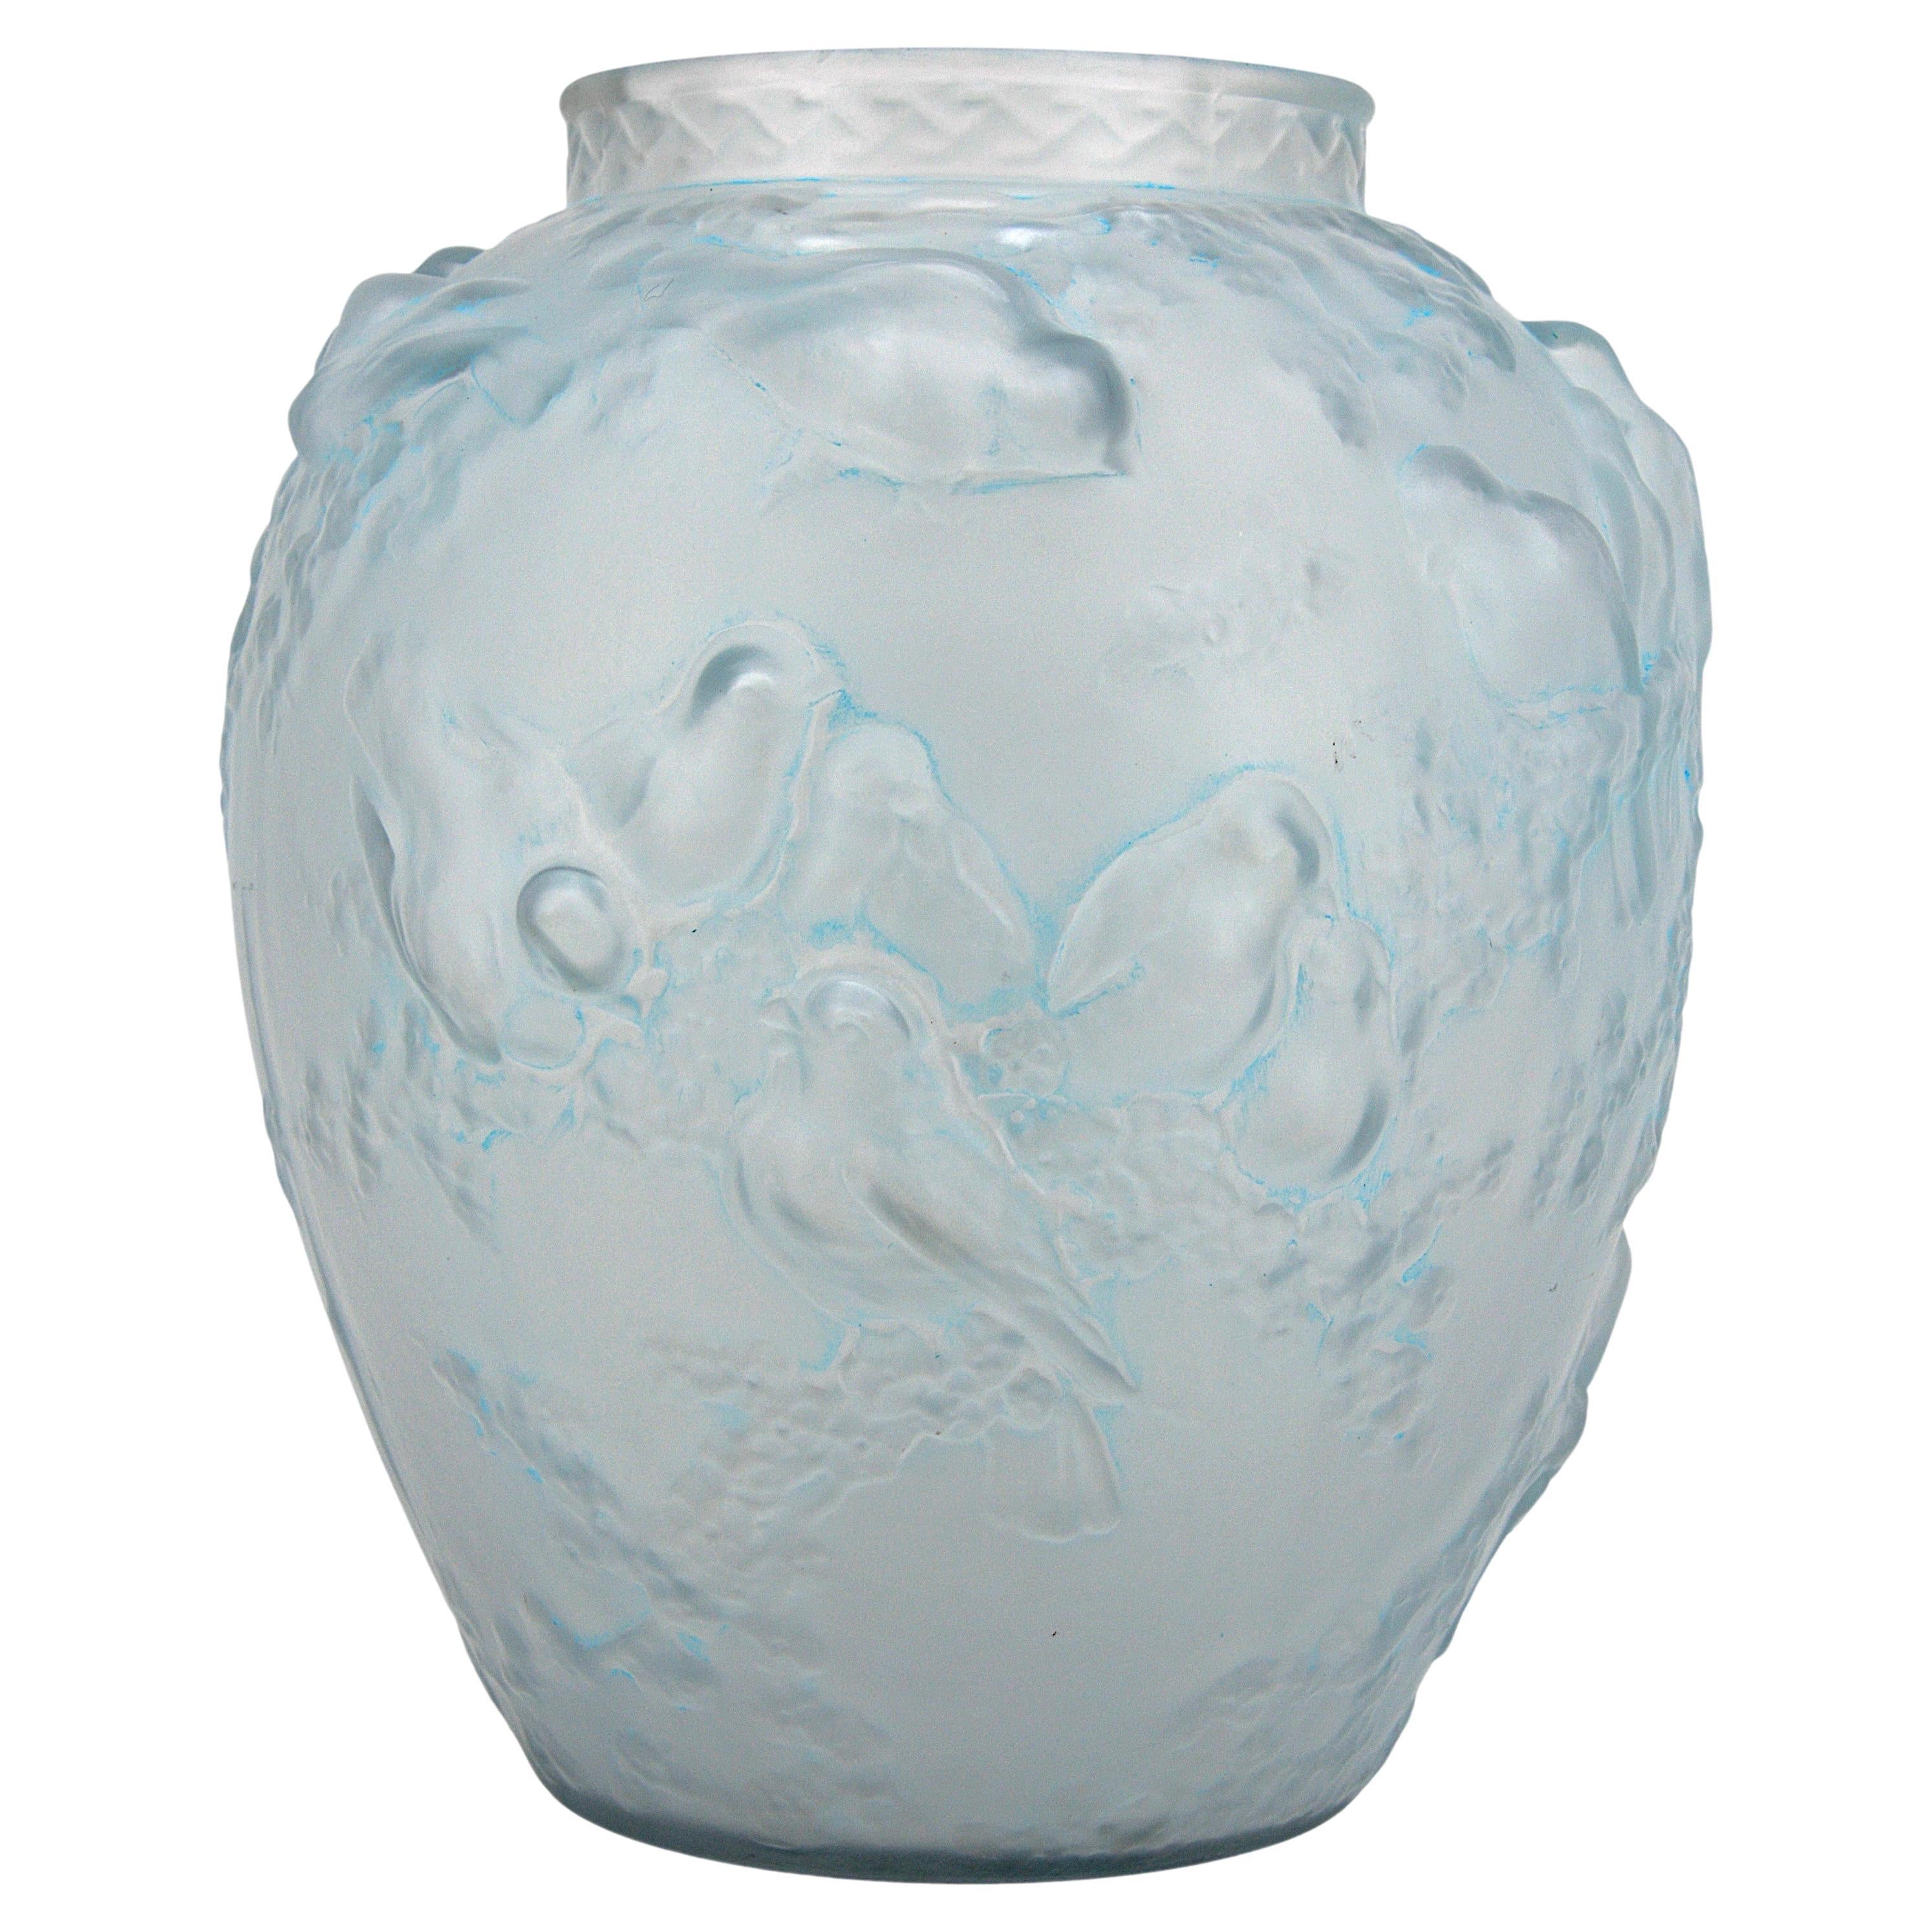 Large frosted glass vase by Muller Frères (Luneville), France, ca.1925. 21 sparrows in trees. Slight blue patina in places to accentuate the reliefs. Measures: Height : 11.1